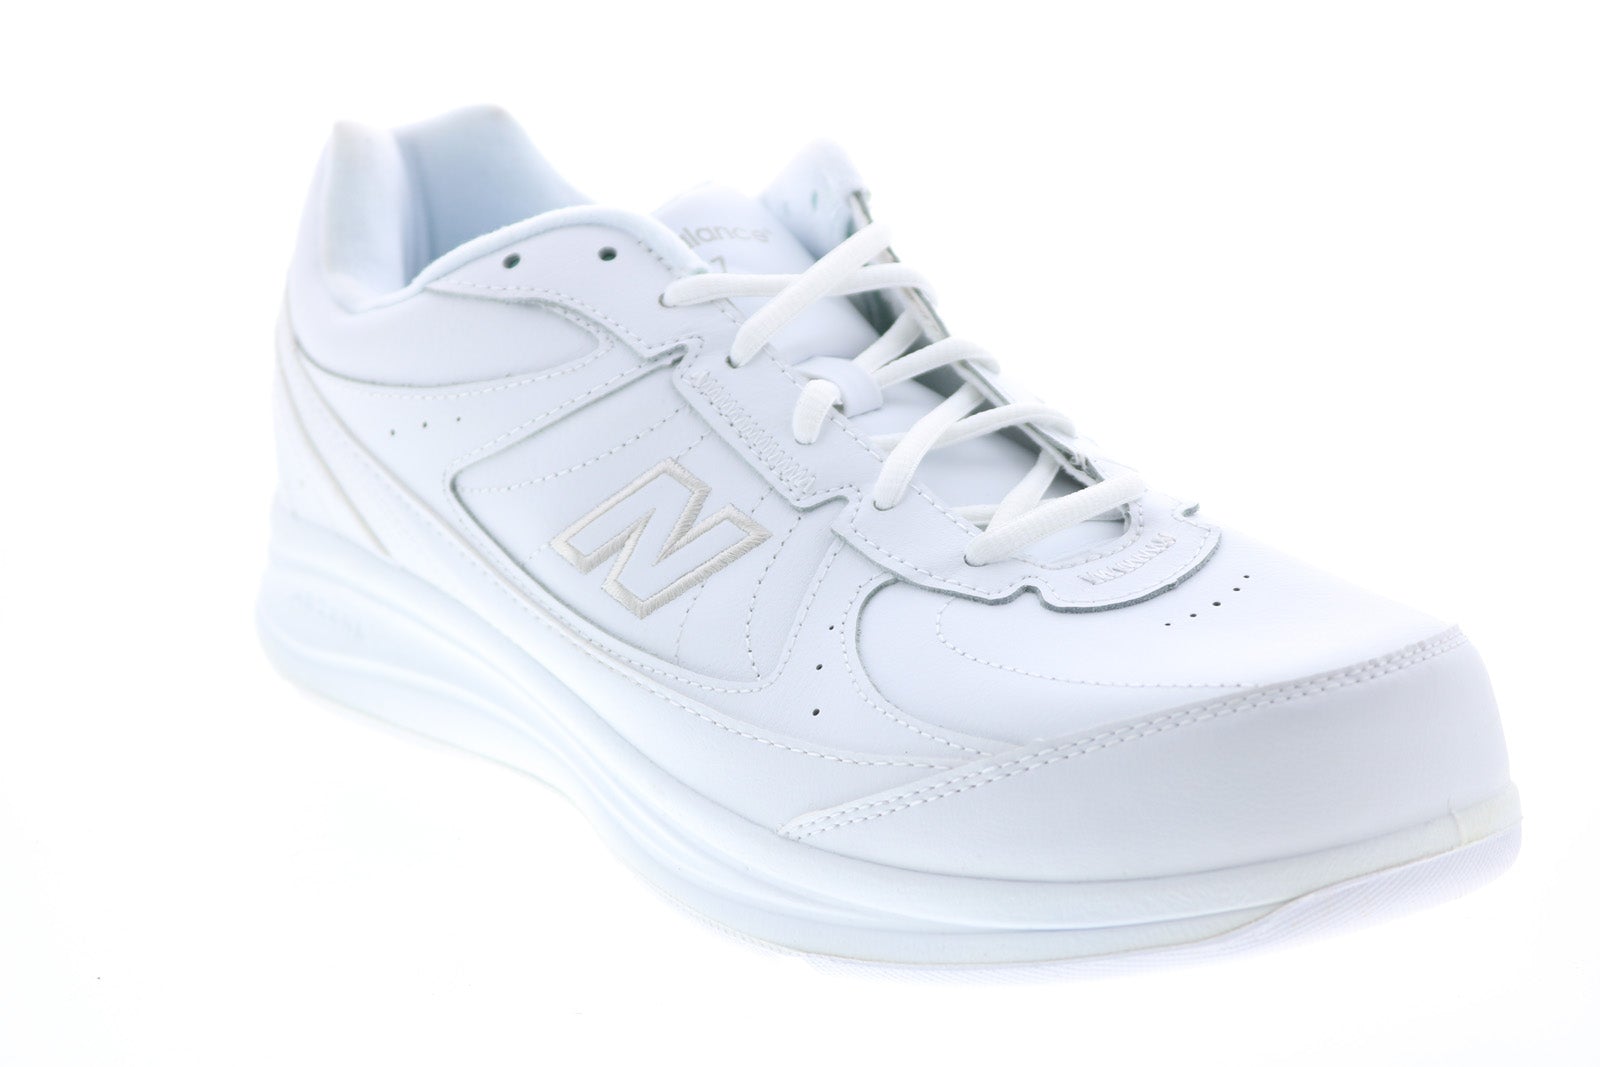 New Balance 577 MW577WT Mens White Extra Wide Leather Athletic Walking ...